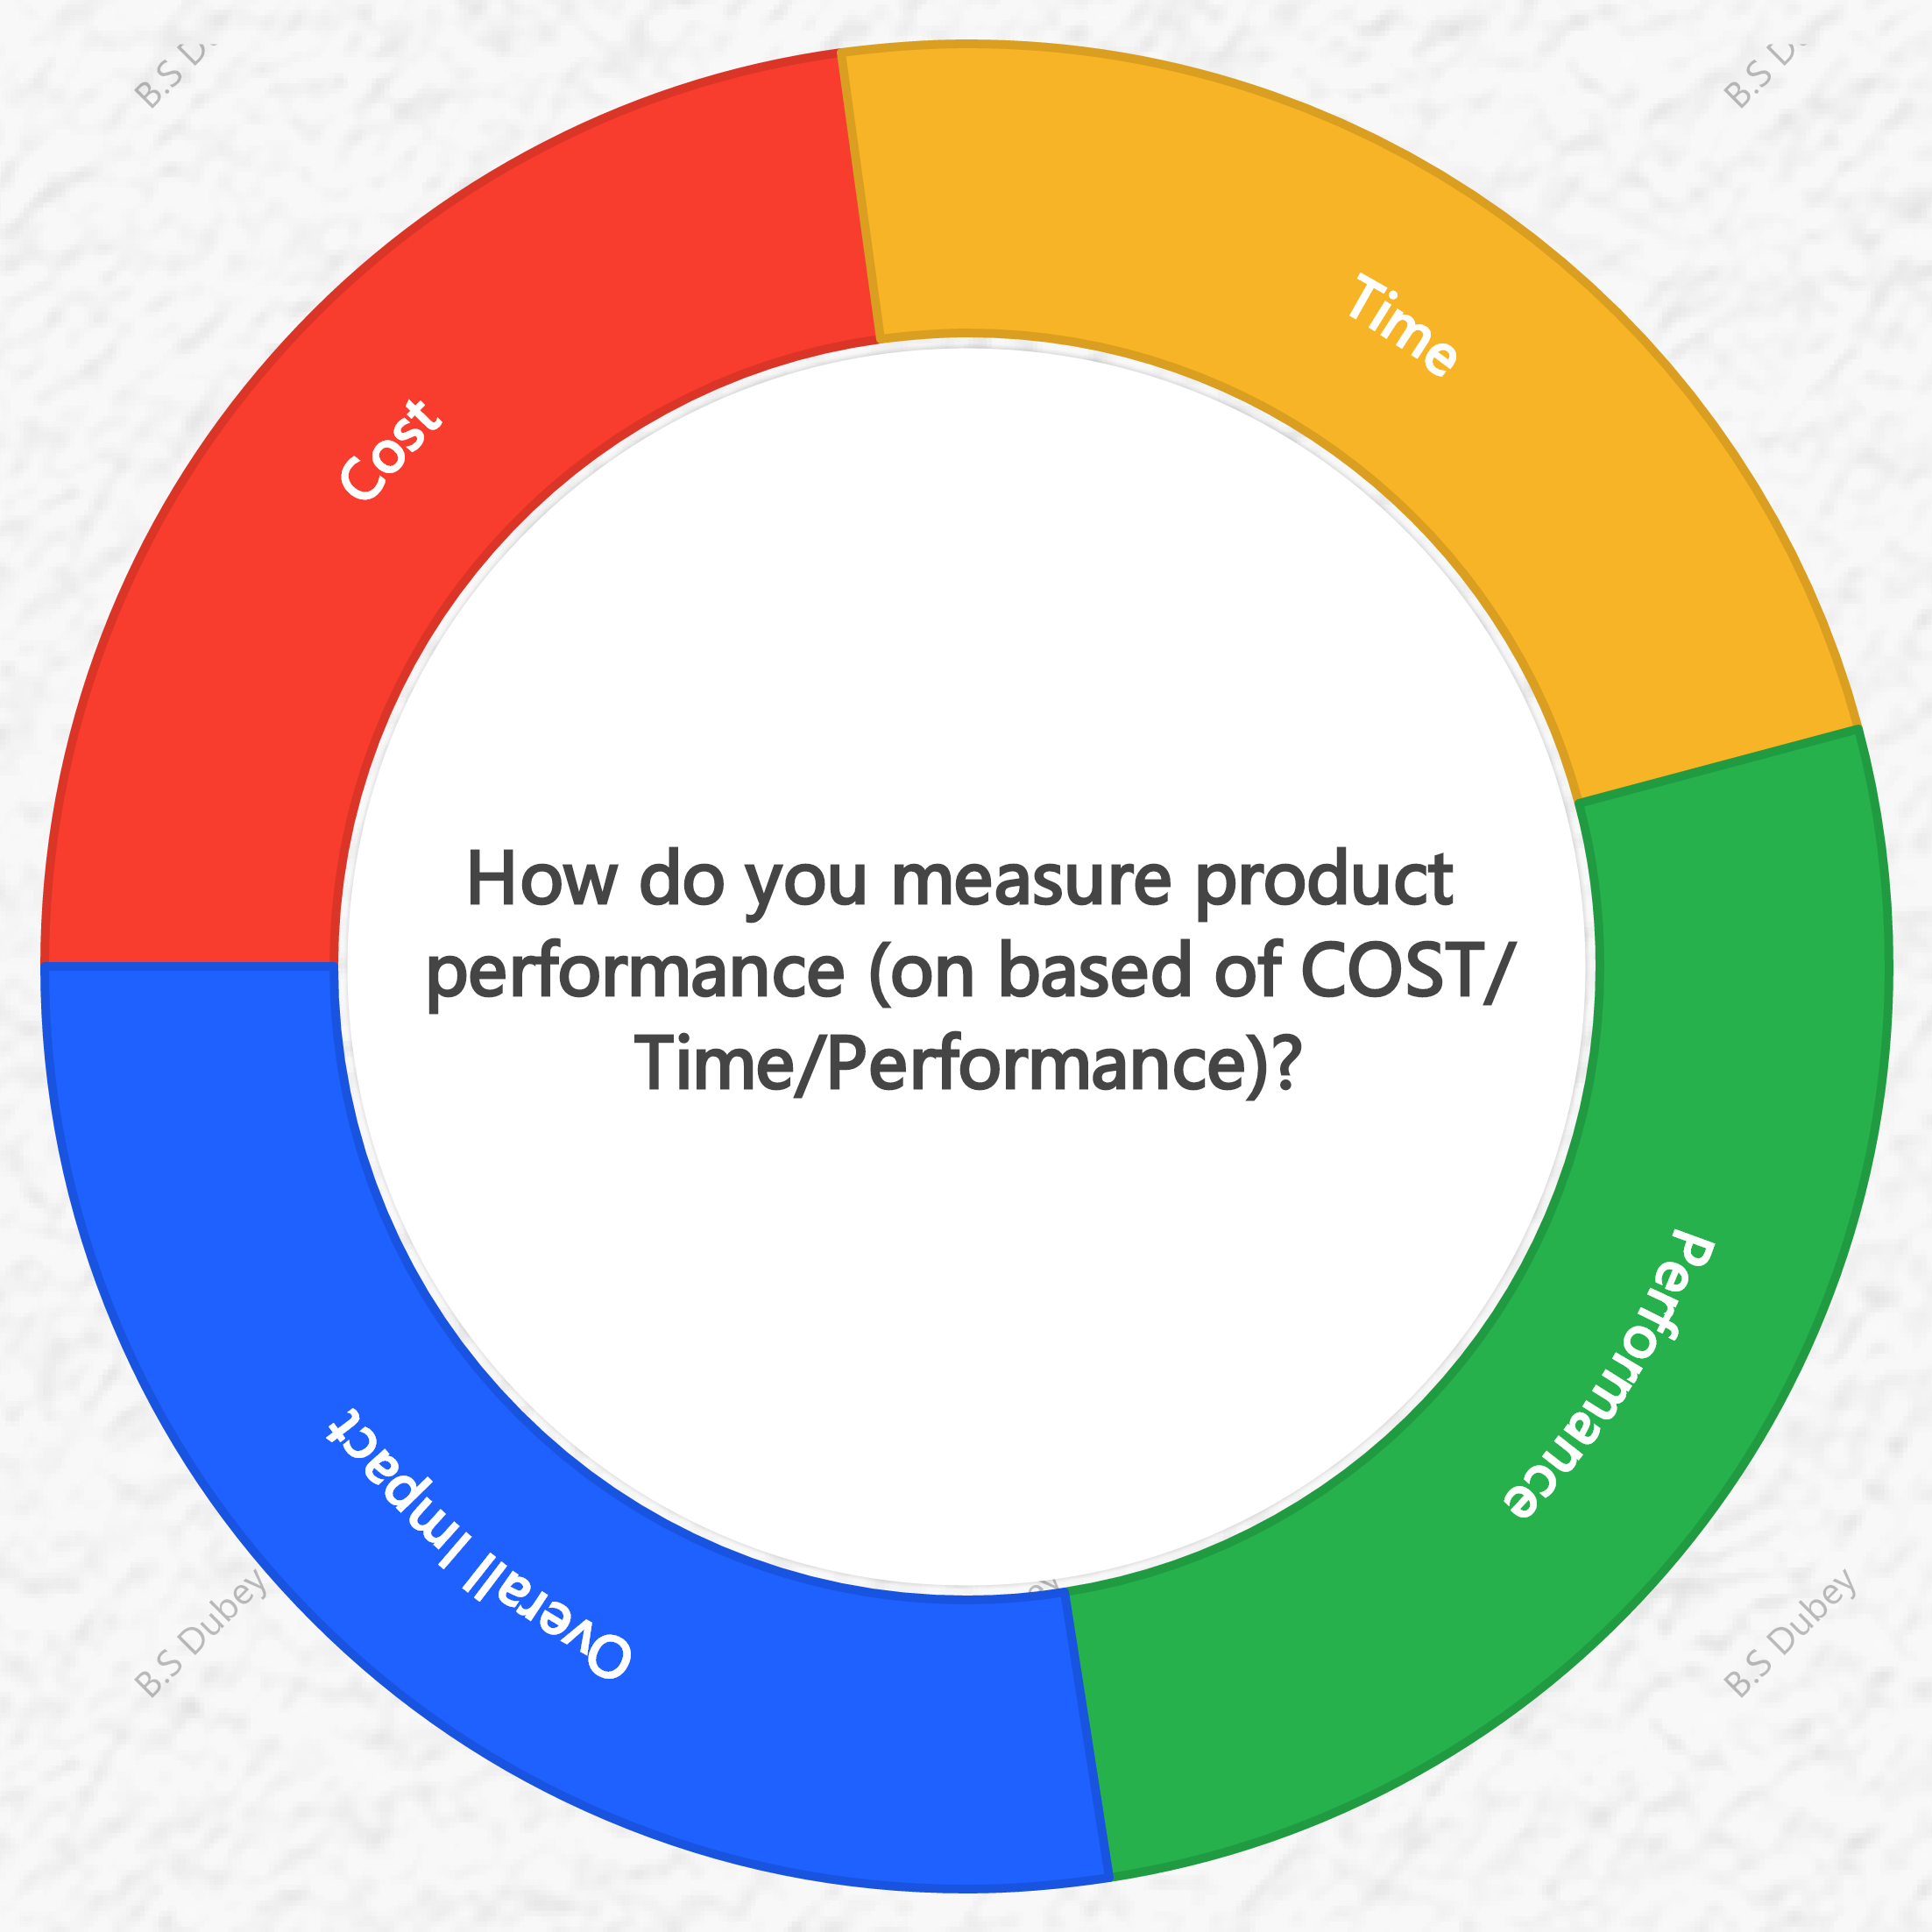 Measure product performance Pie chart